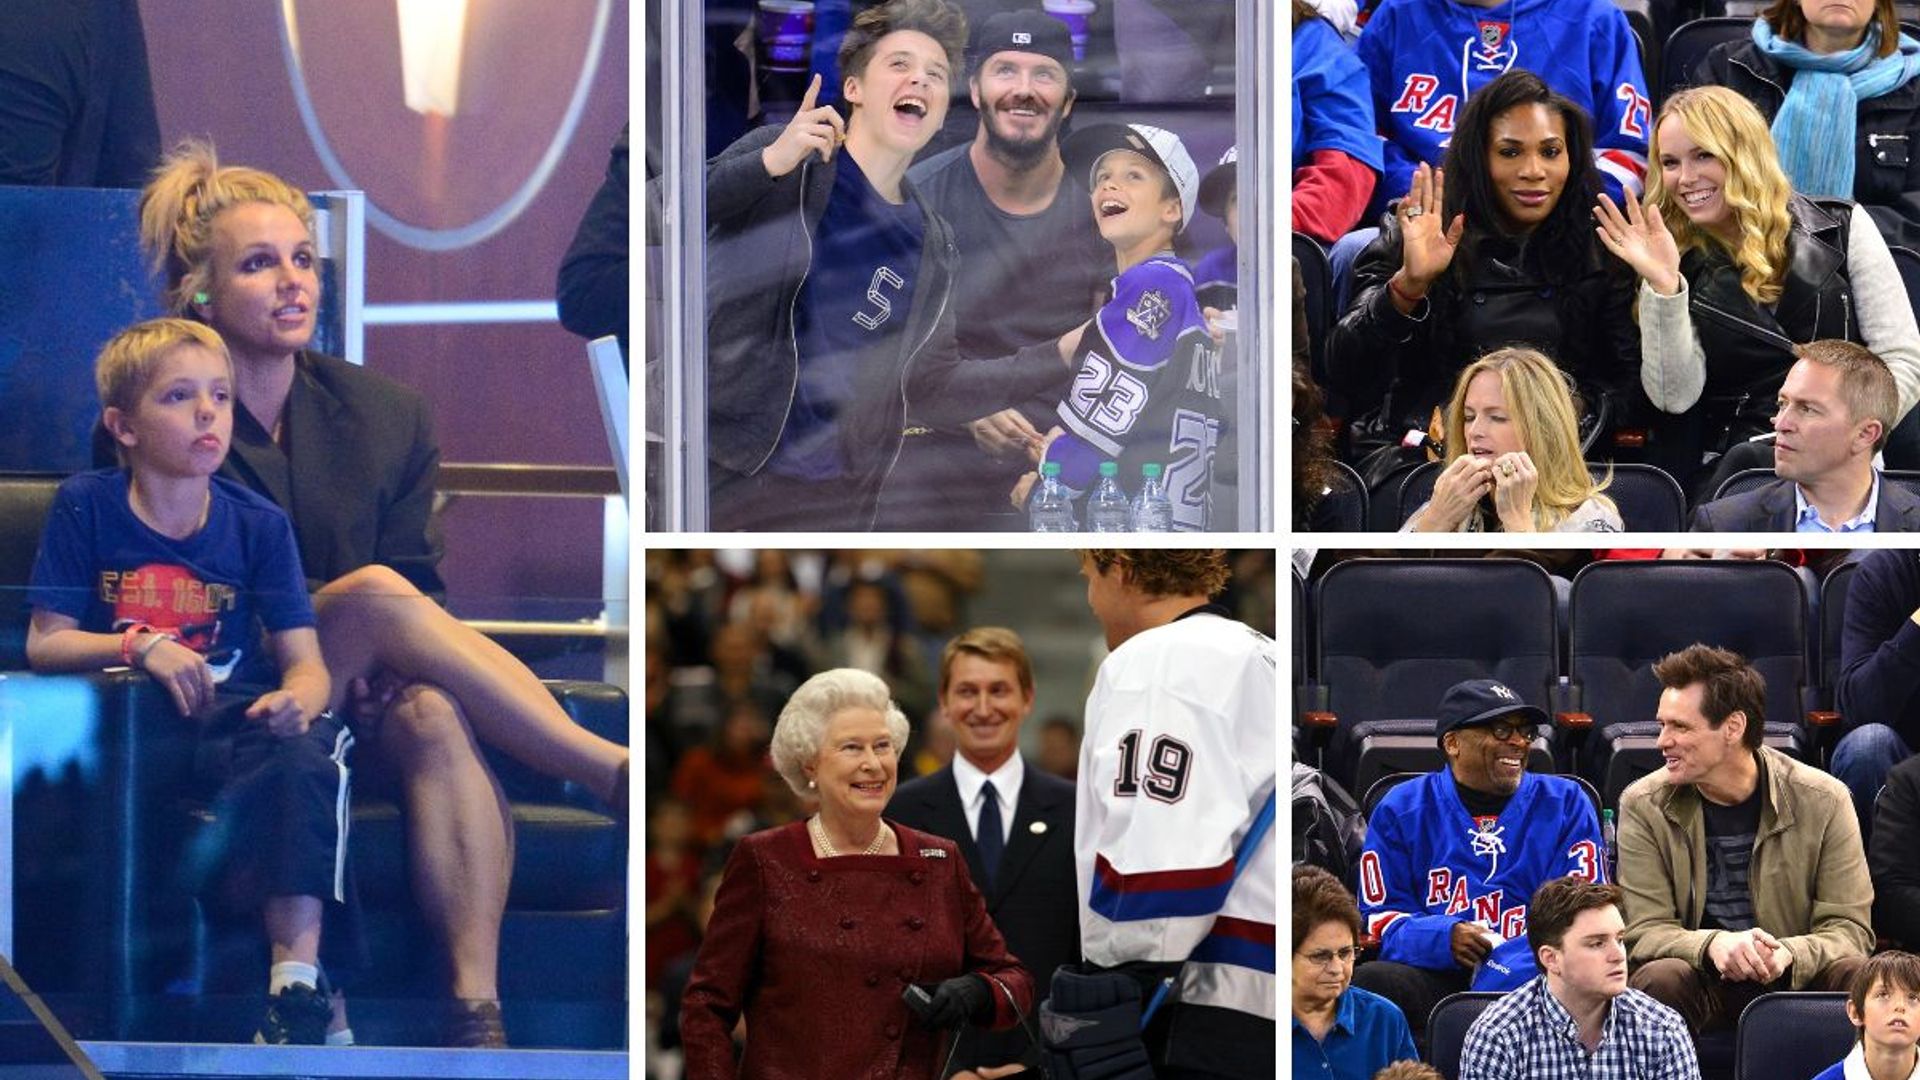 Celeb Sports Fans Get Their Cheer On